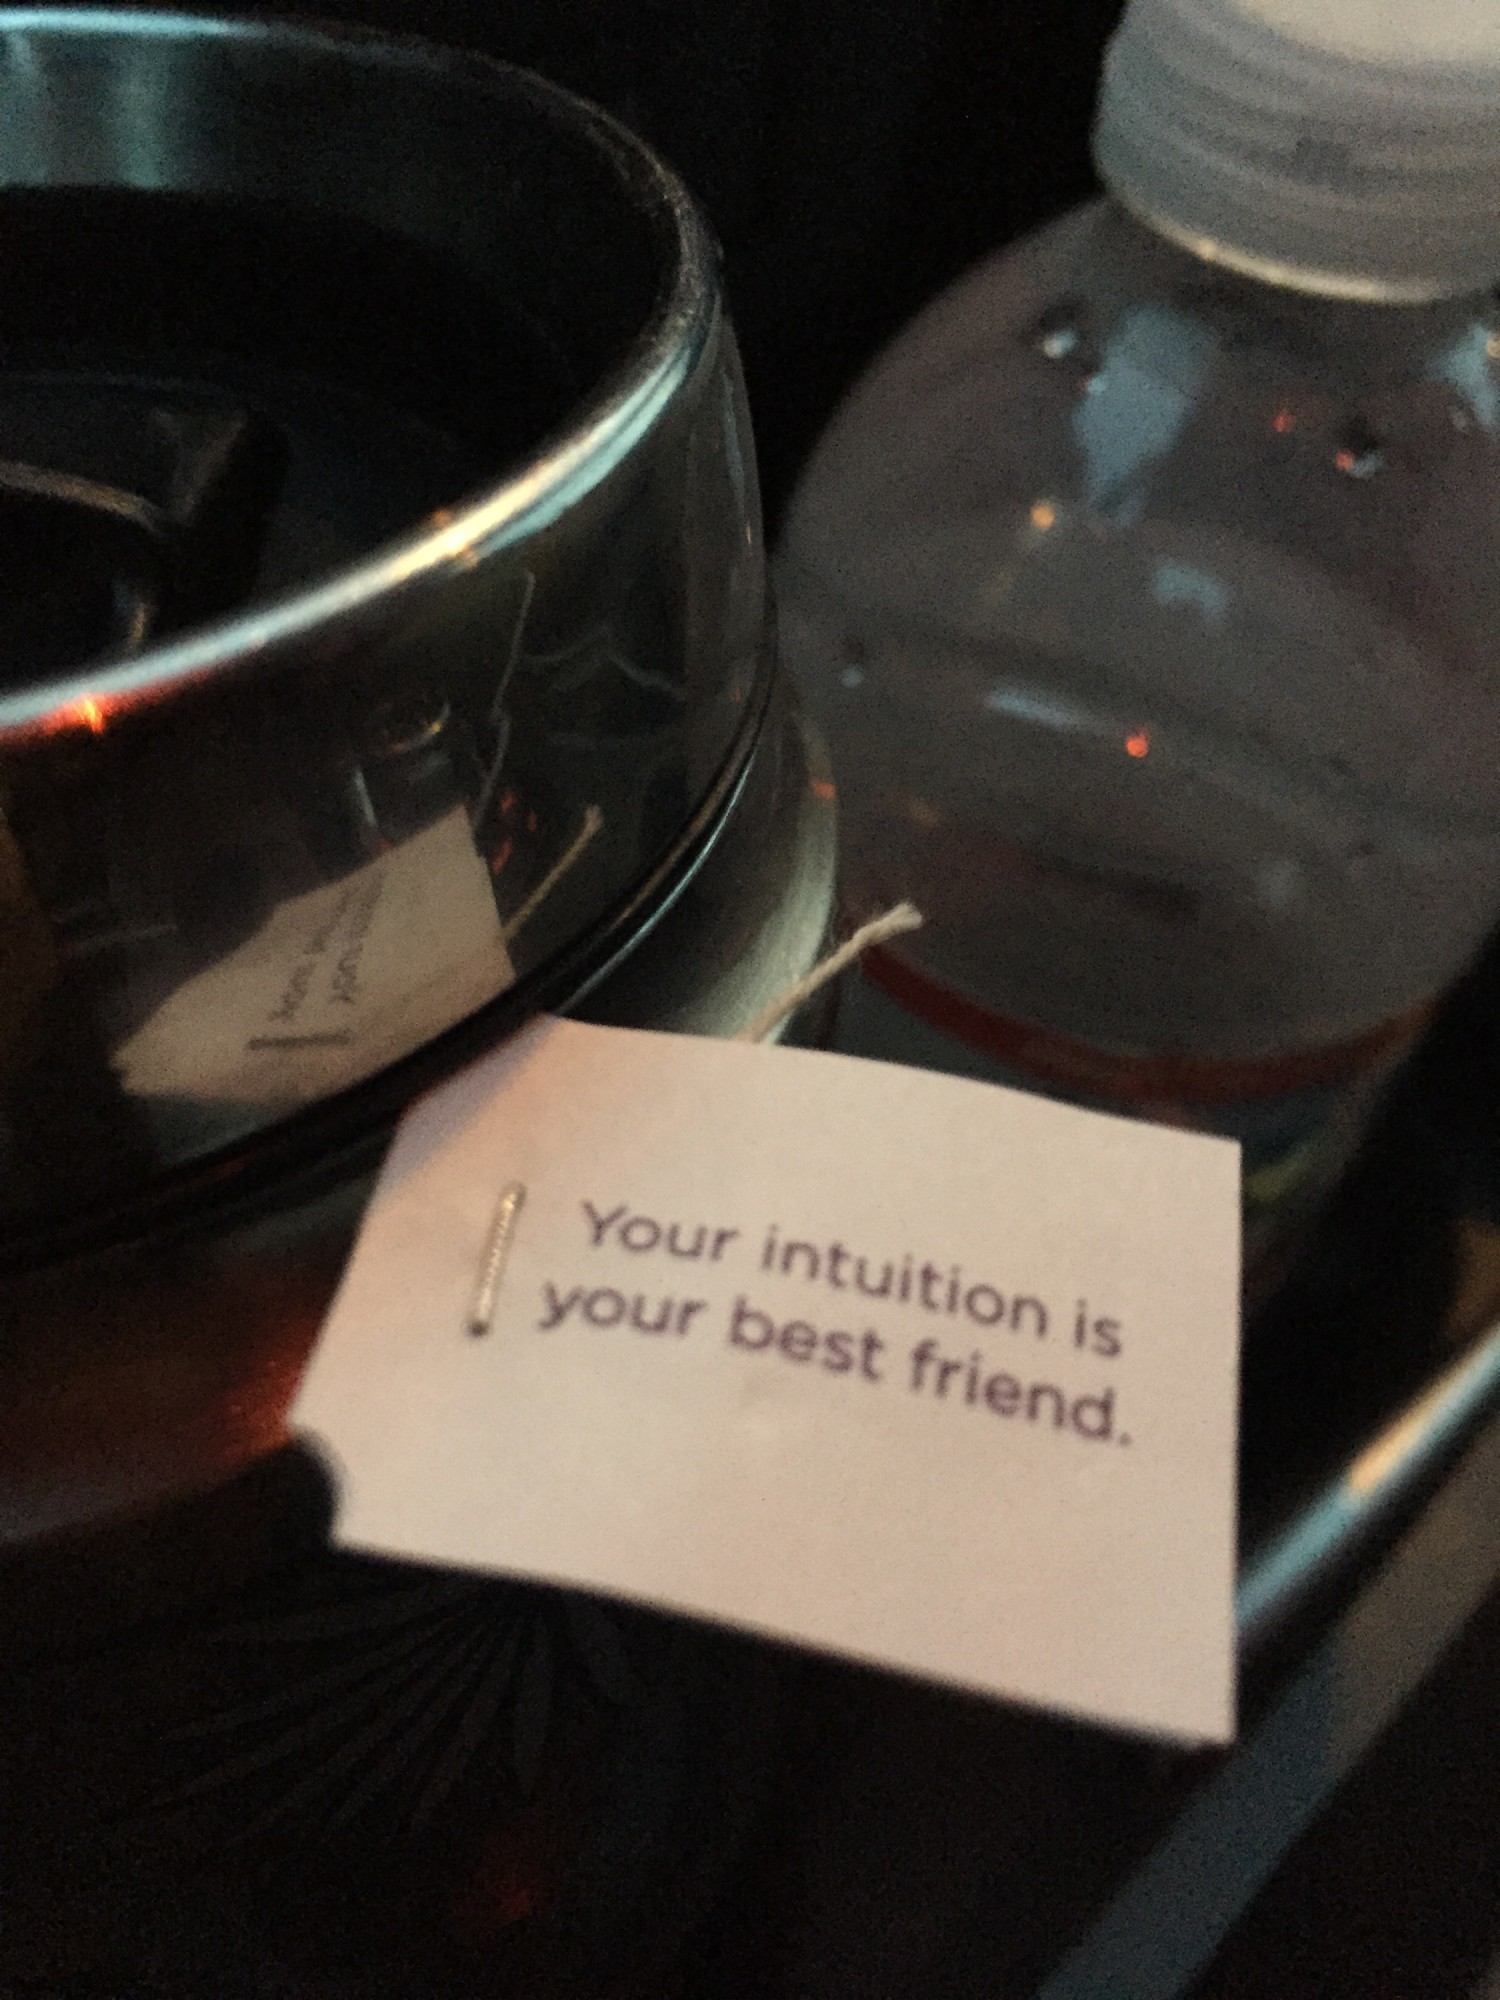 Your intuition is your best friend